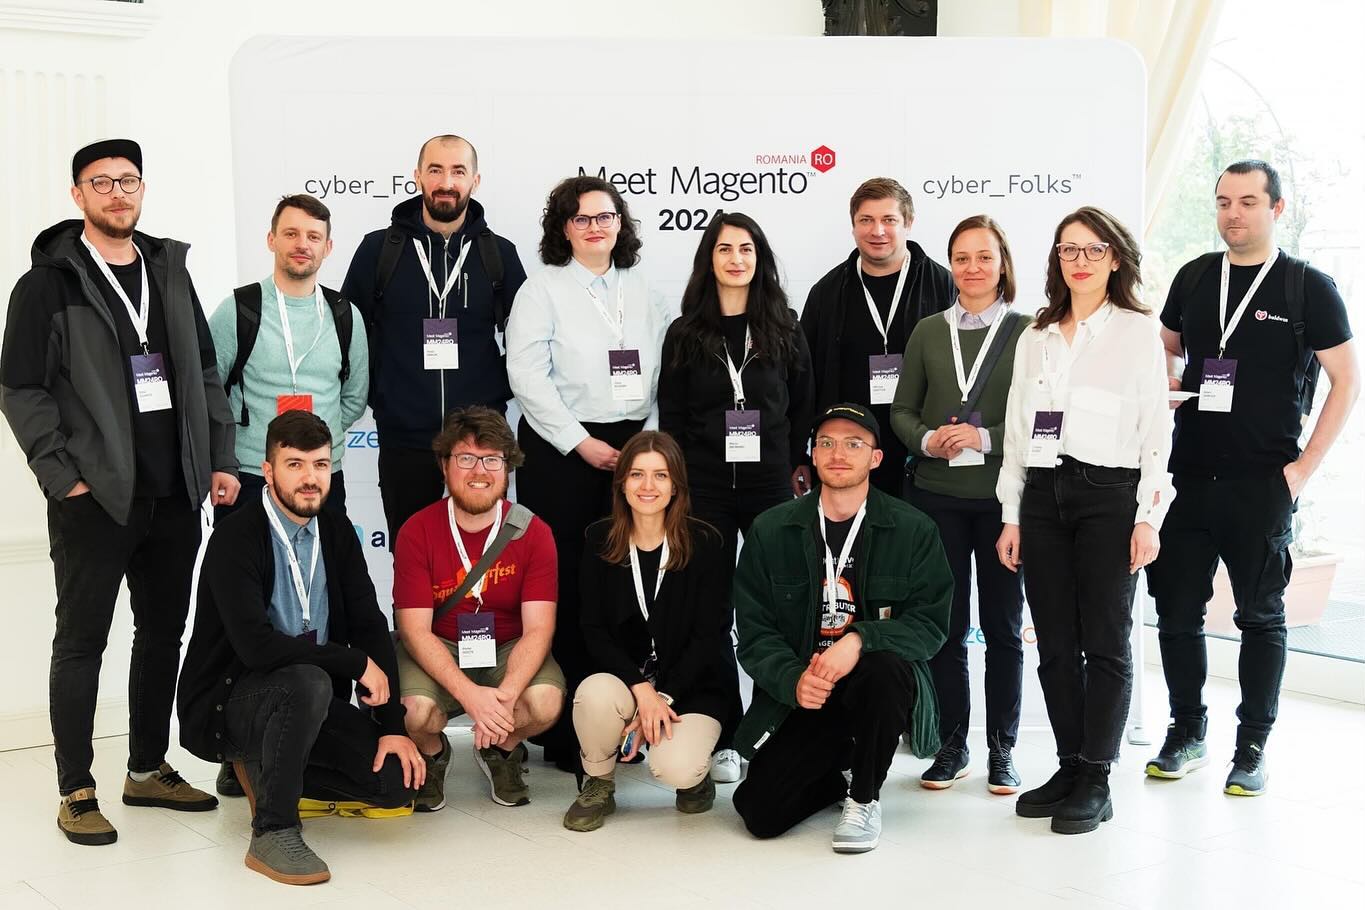 Some more #mm24ro moments 🫶
__
#magentodevelopment #hyvä #moments 
Pictures credit: Meet Magento Romania